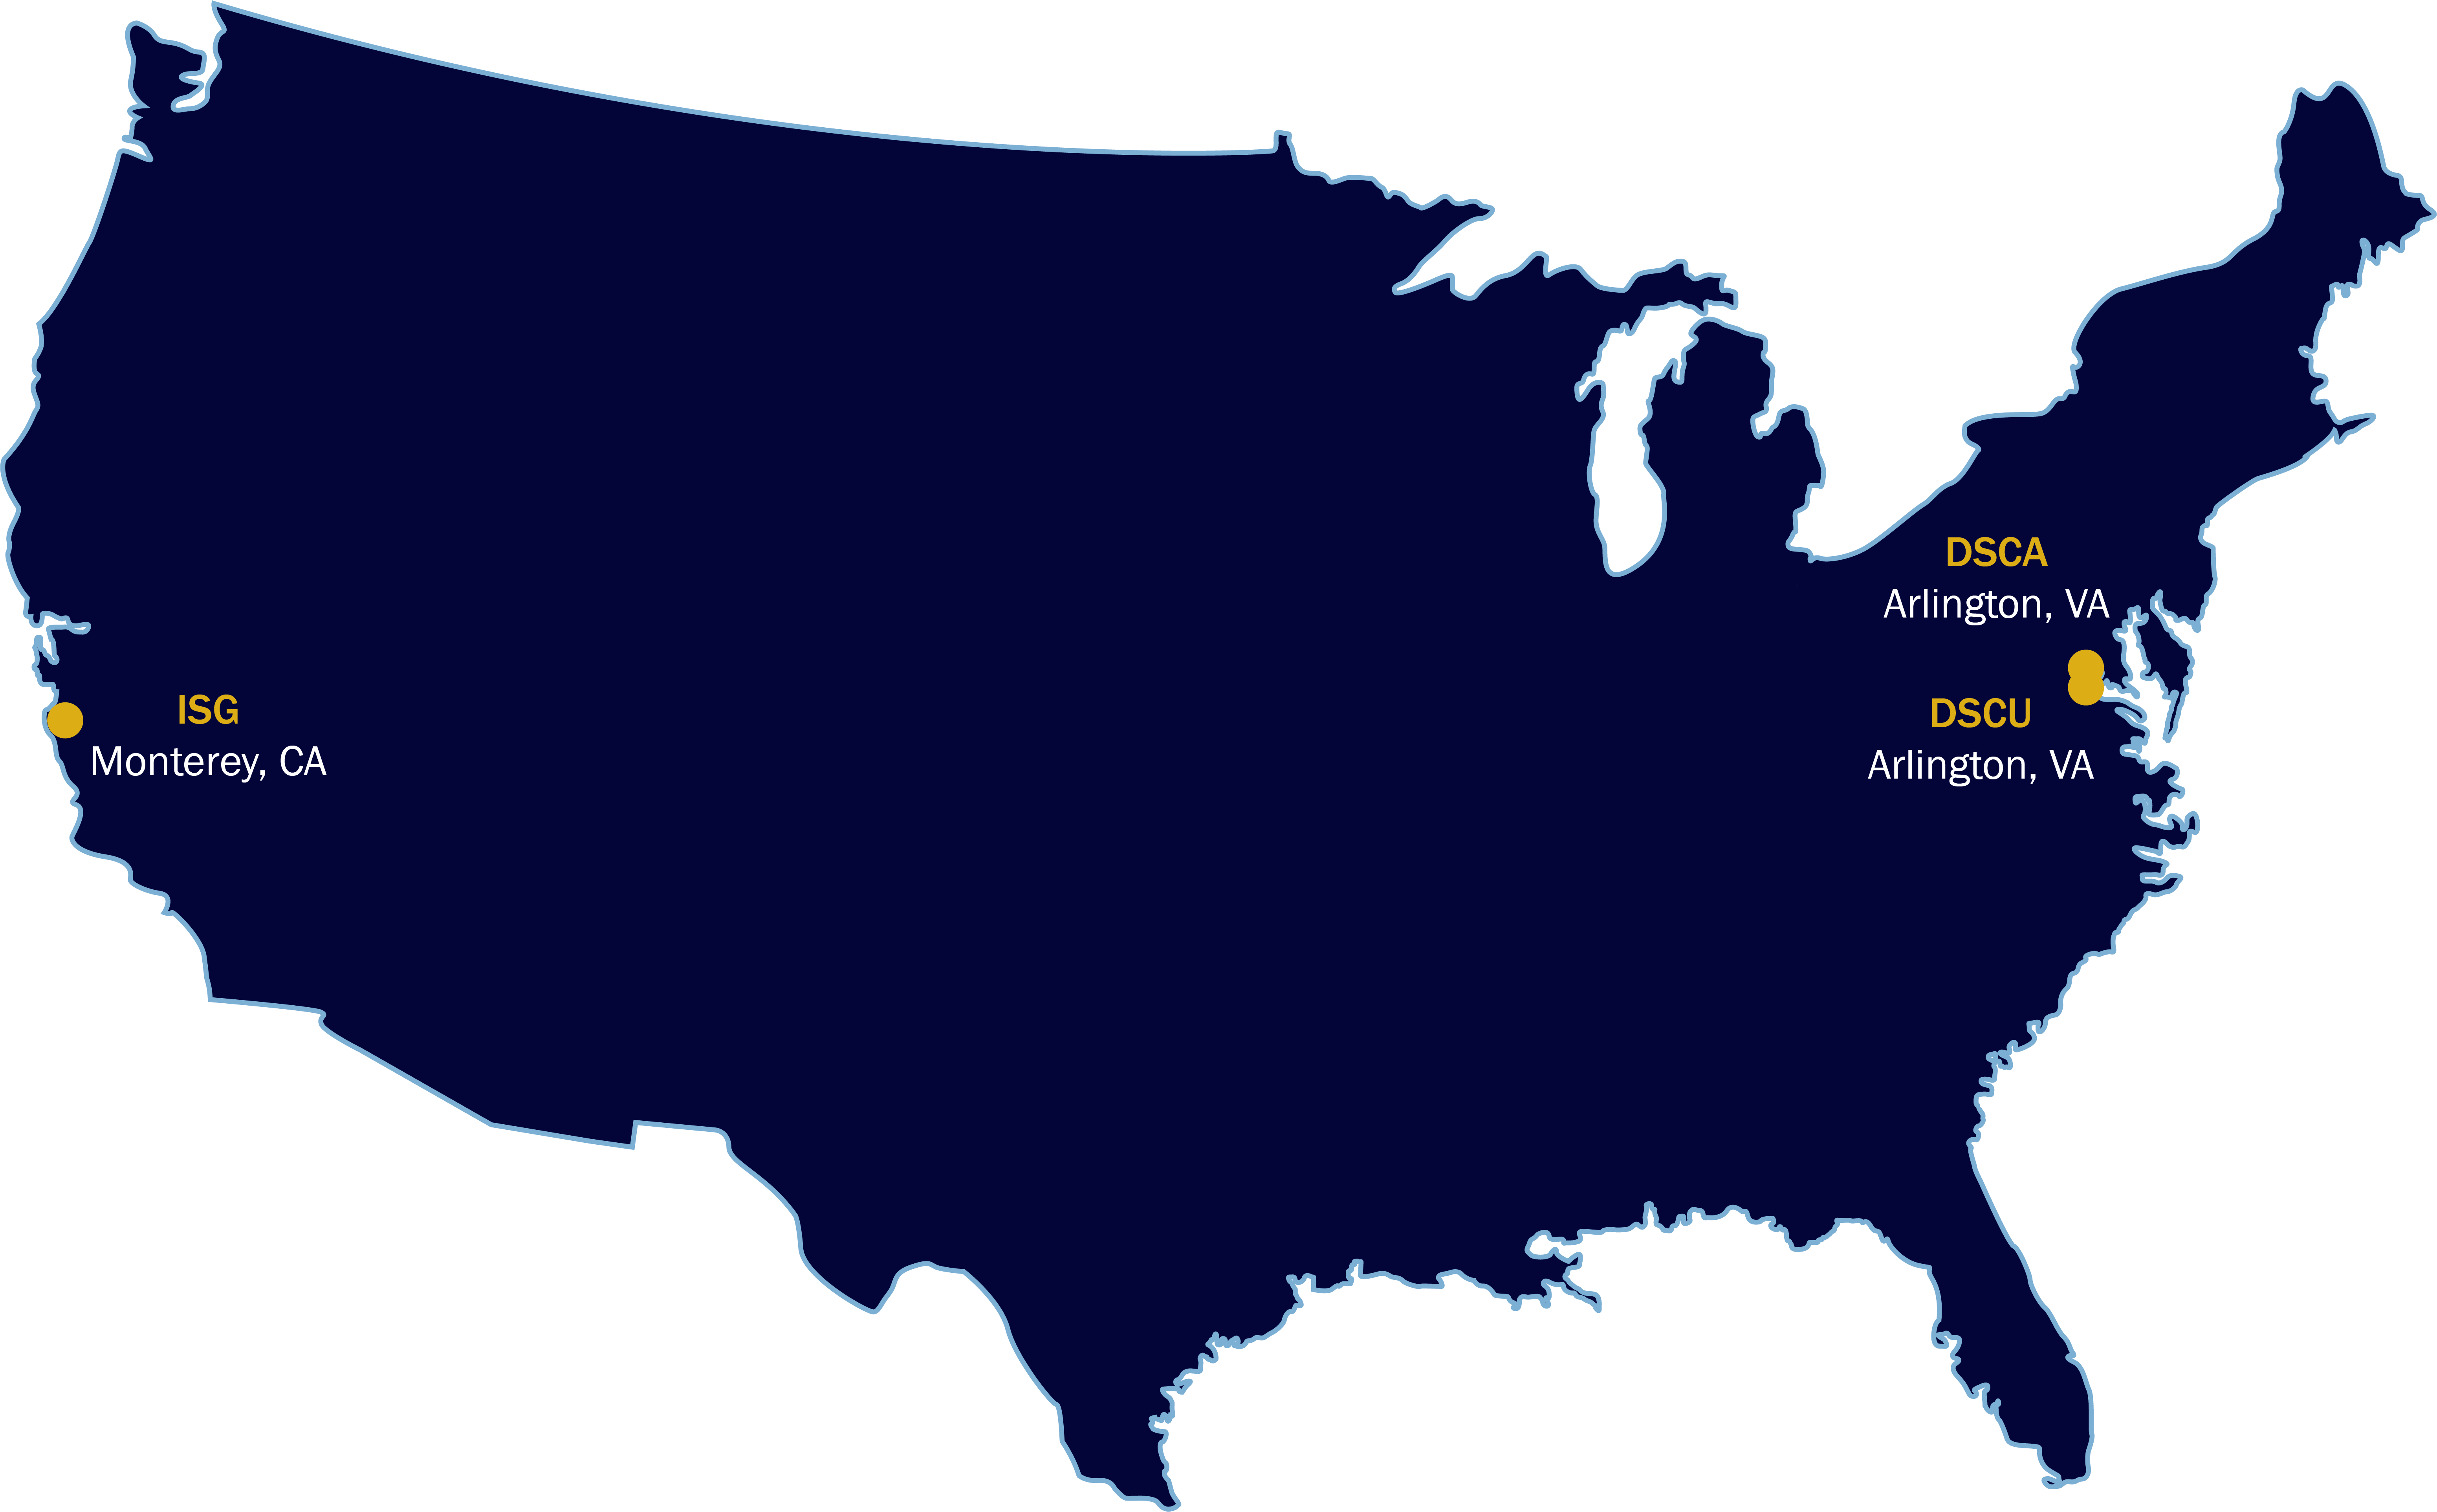 structure of the continental United States with a thin, light blue outline.